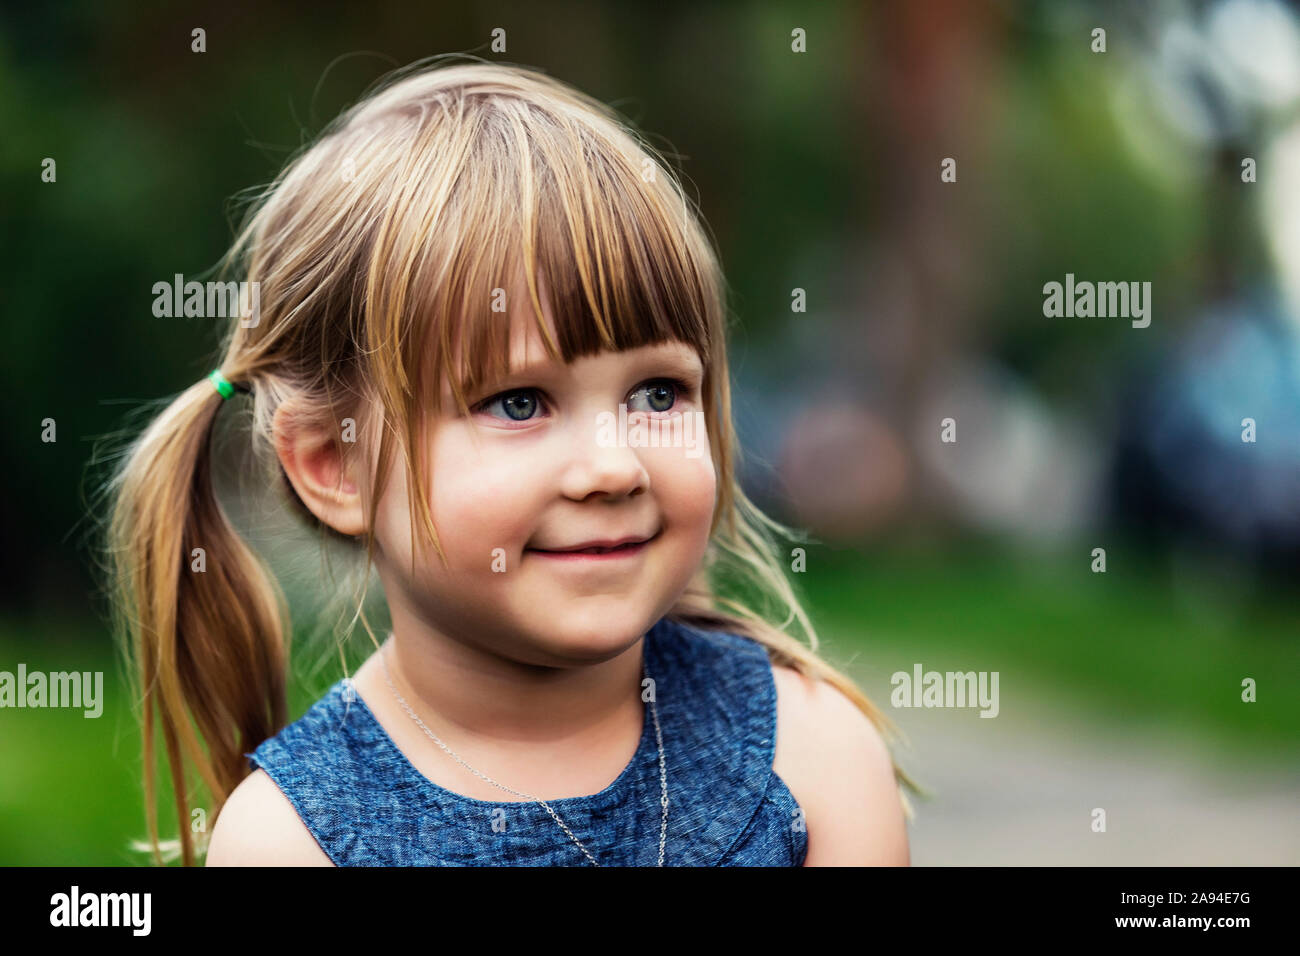 Portrait of a cute young girl with blond hair in pigtails; Edmonton, Alberta, Canada Stock Photo